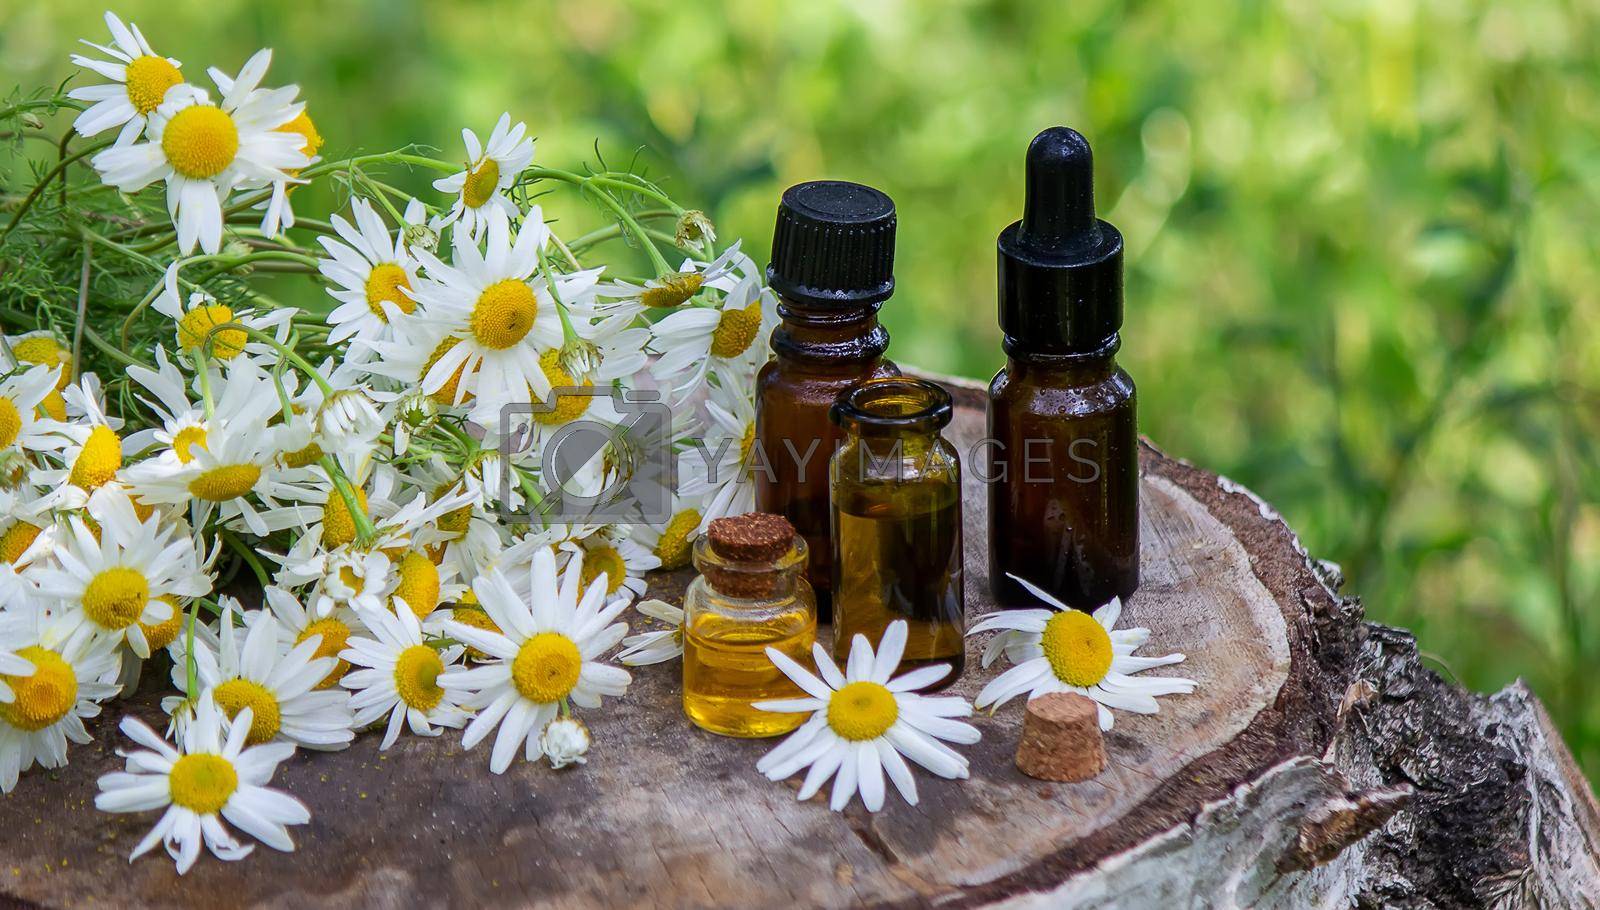 Royalty free image of chamomile essential oil on a wooden background. by Anuta23